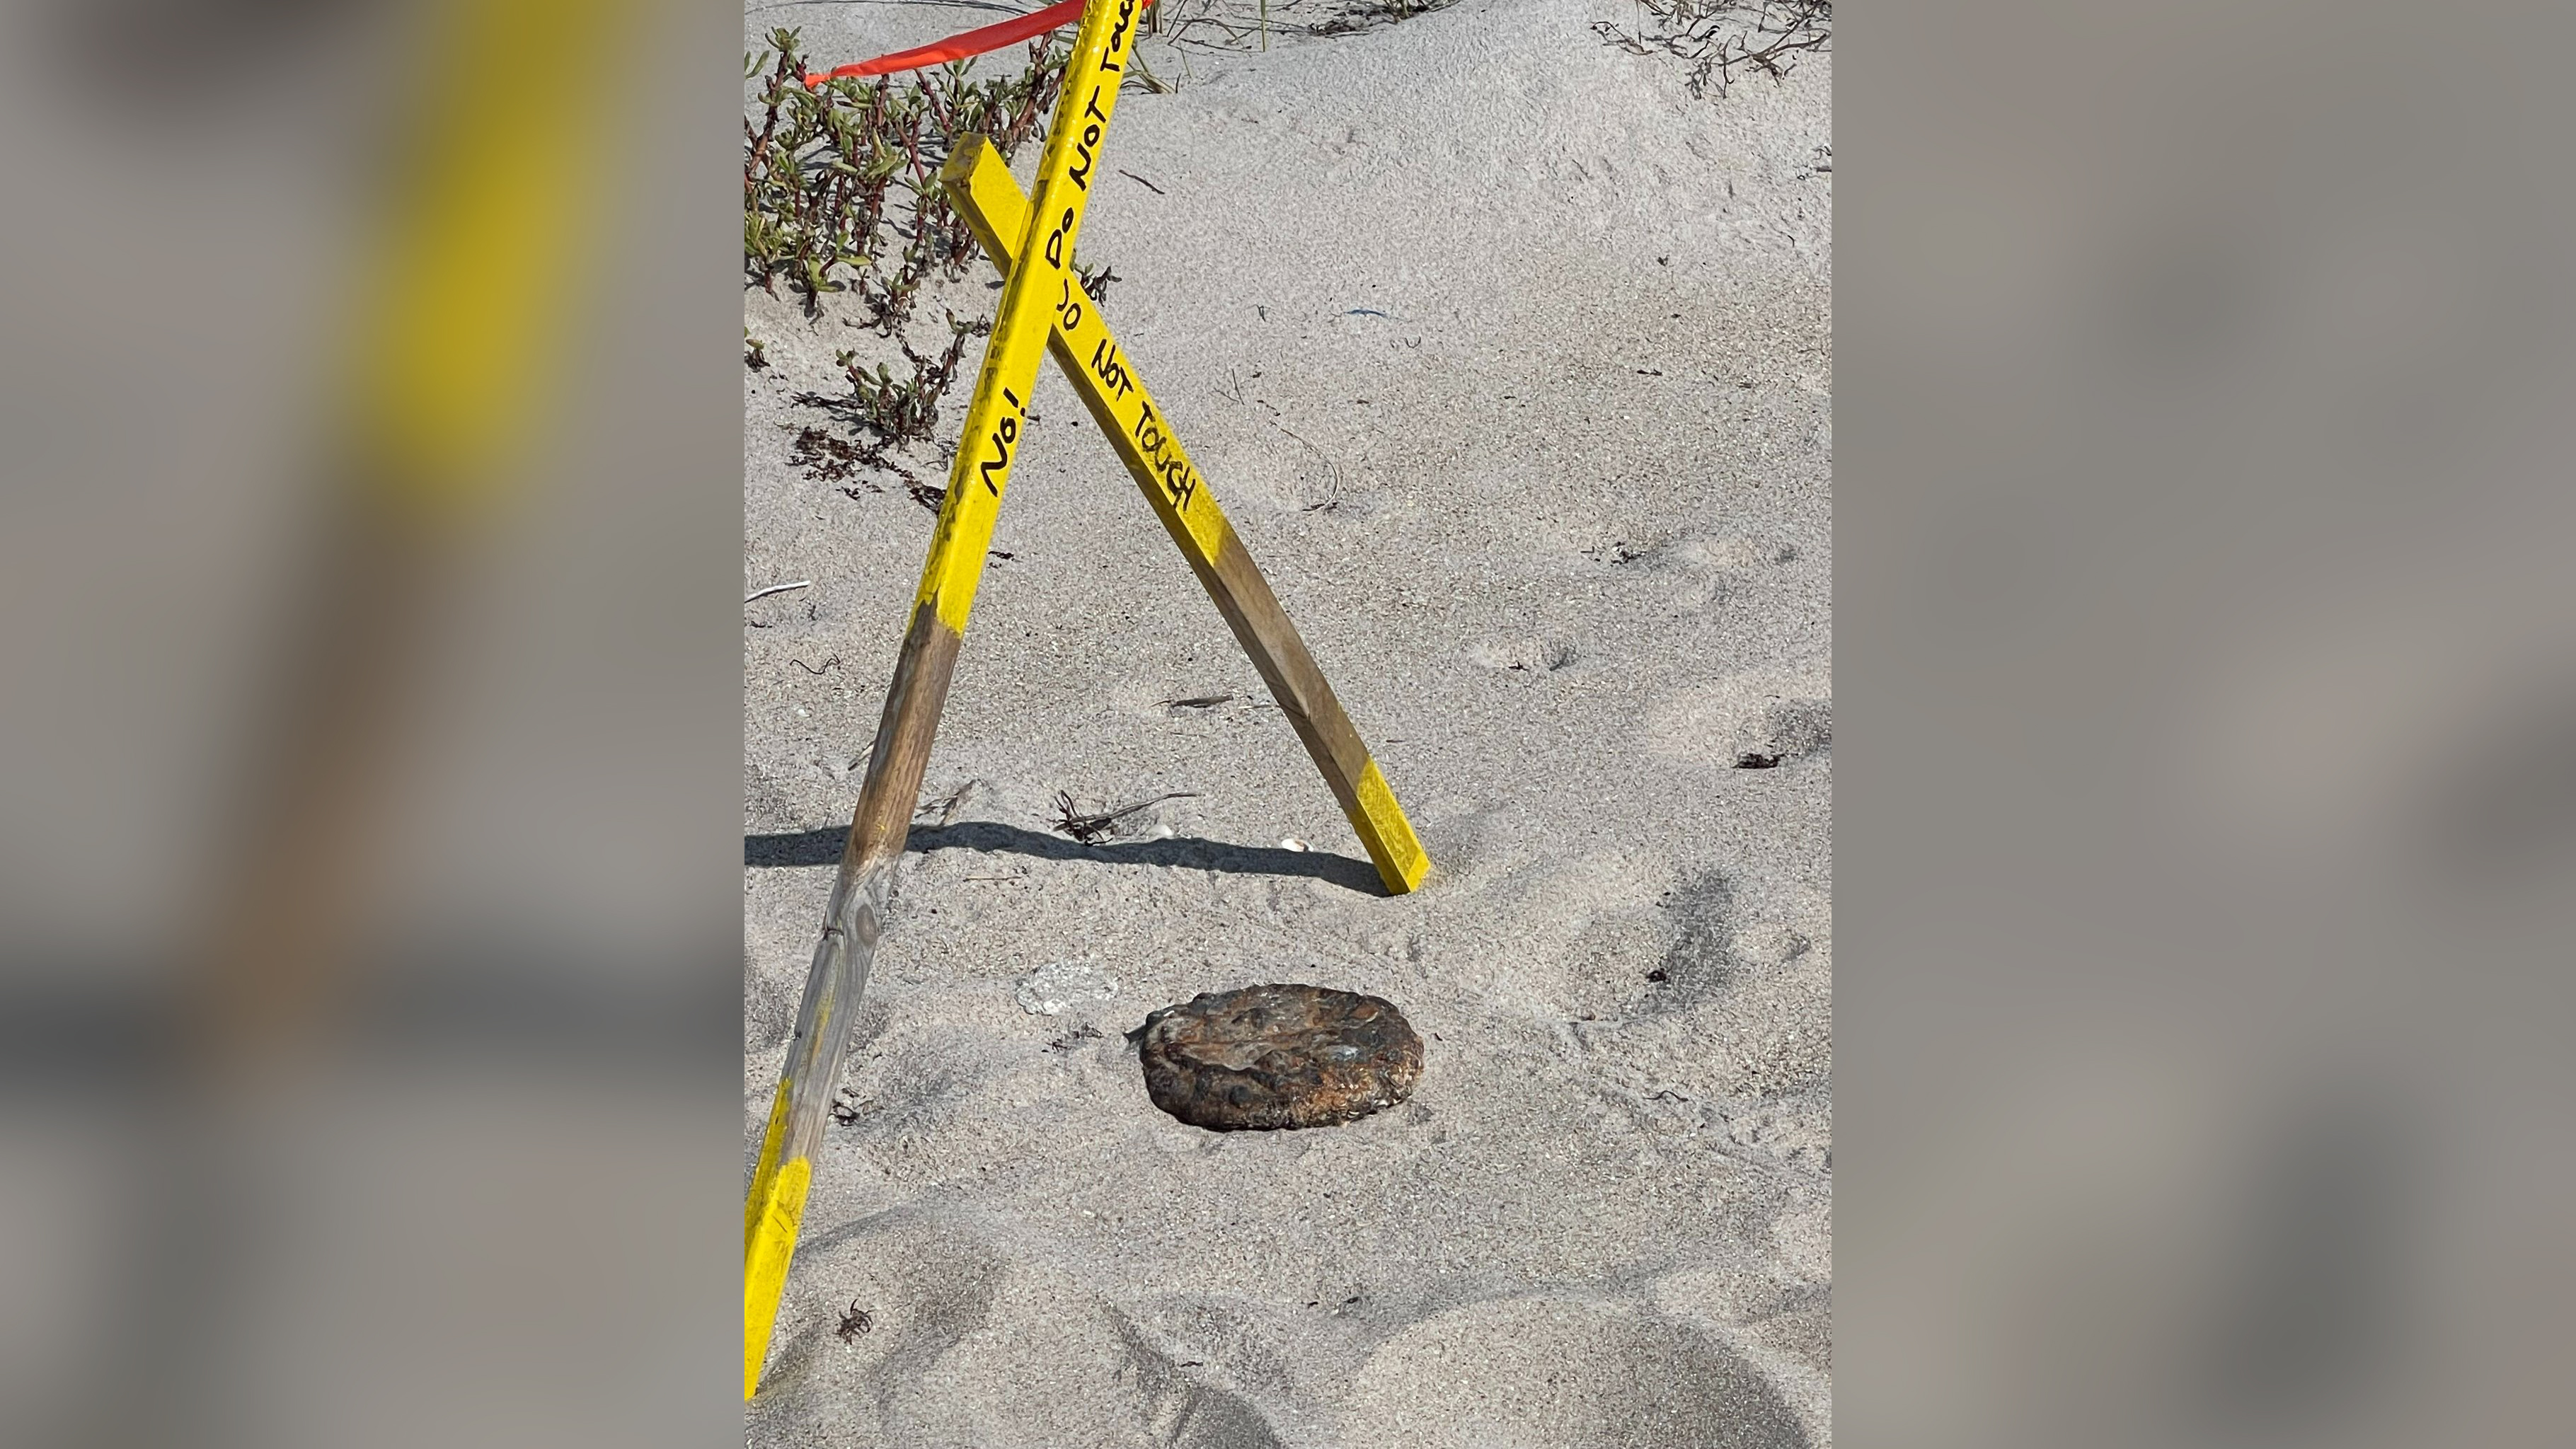 A Suspected Land Mine Was Removed From Florida Beach – CBS Tampa